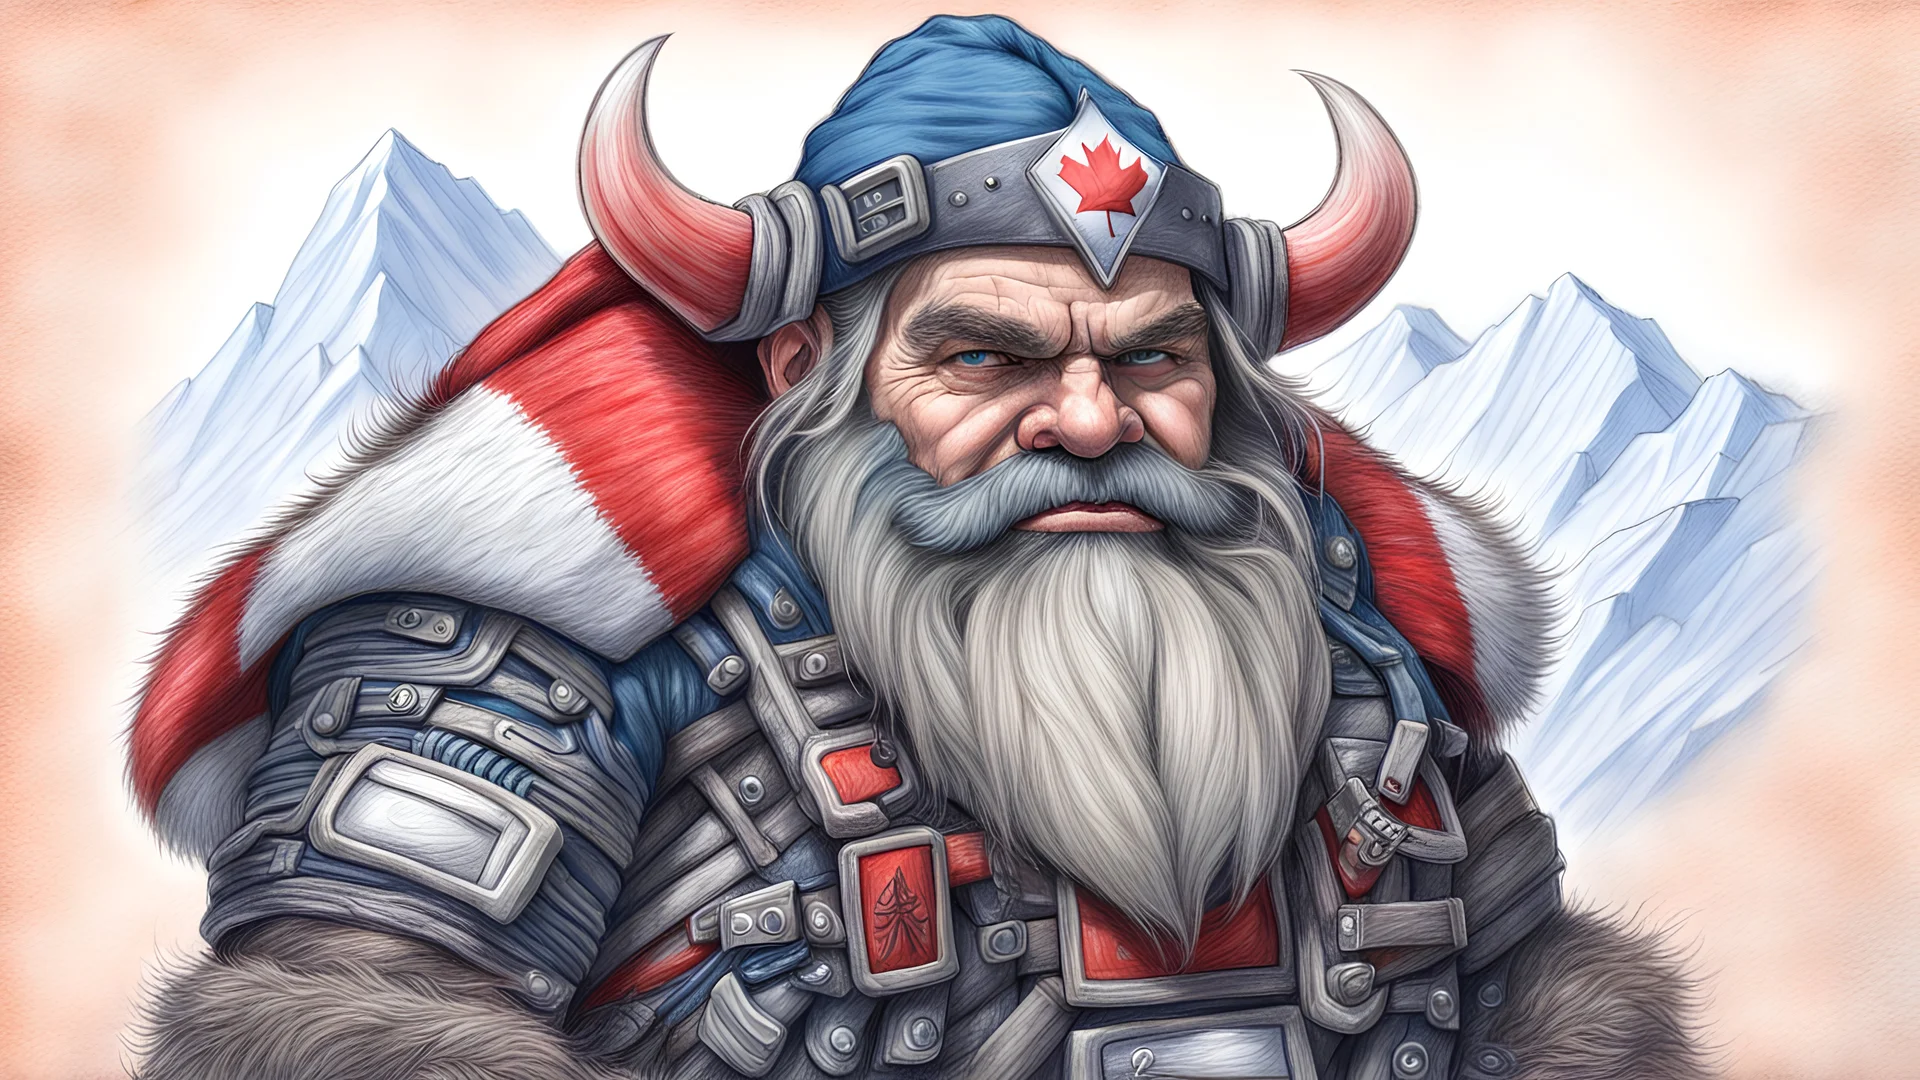 Coloured Pencil sketch of a Cyber hacker Mountain Dwarf with Epic Canadian Pride! More Canada.